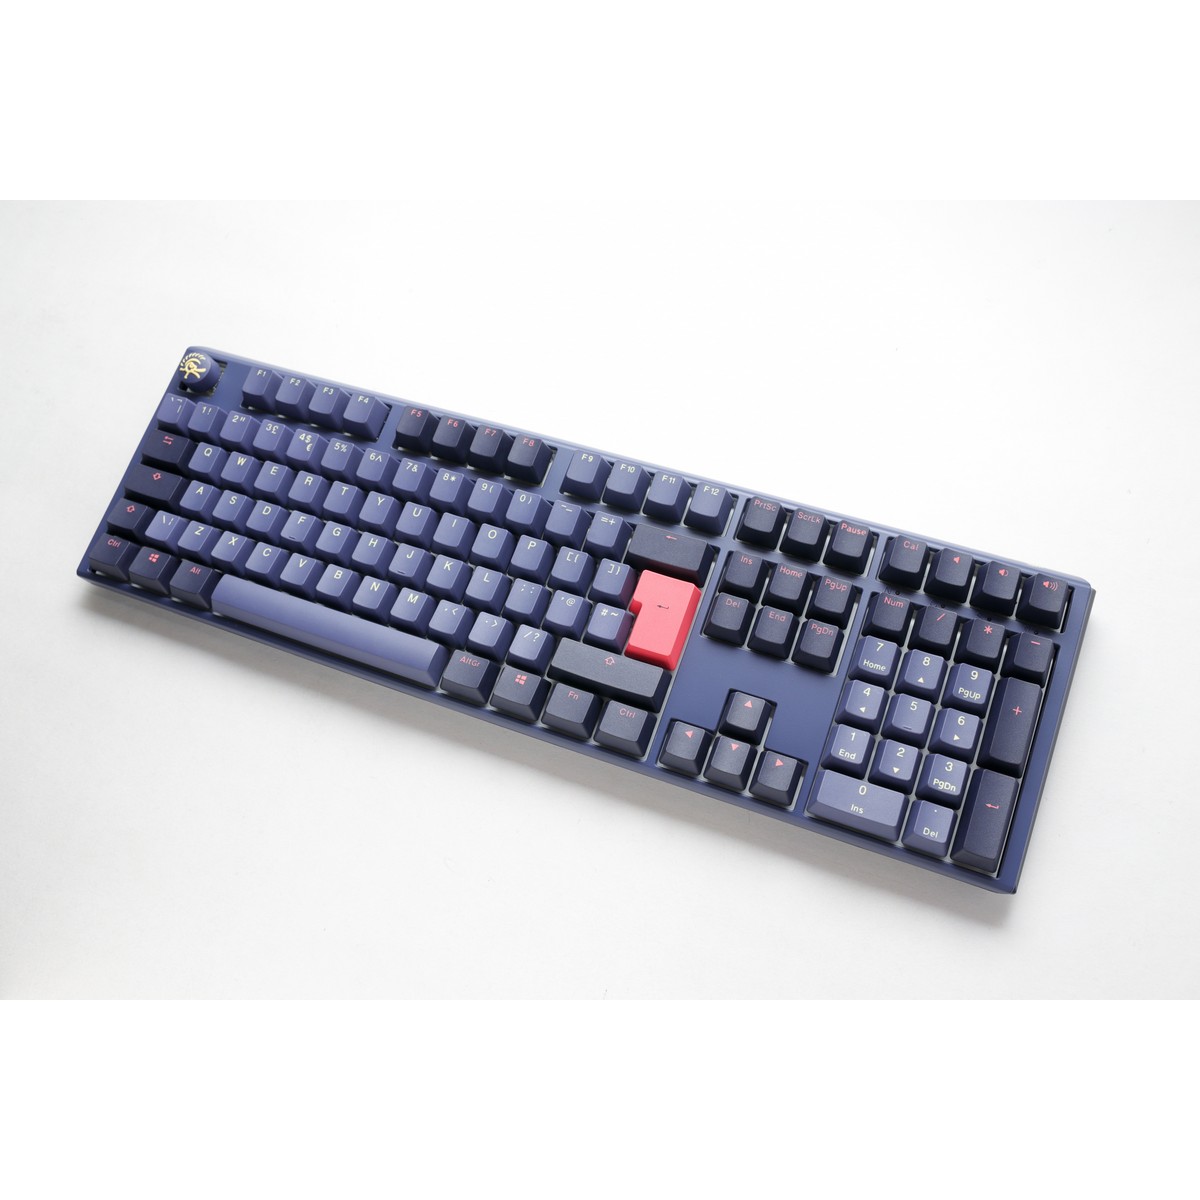 Ducky - Ducky One 3 Cosmic USB RGB Mechanical Gaming Keyboard Cherry MX Brown Switch - UK Layout